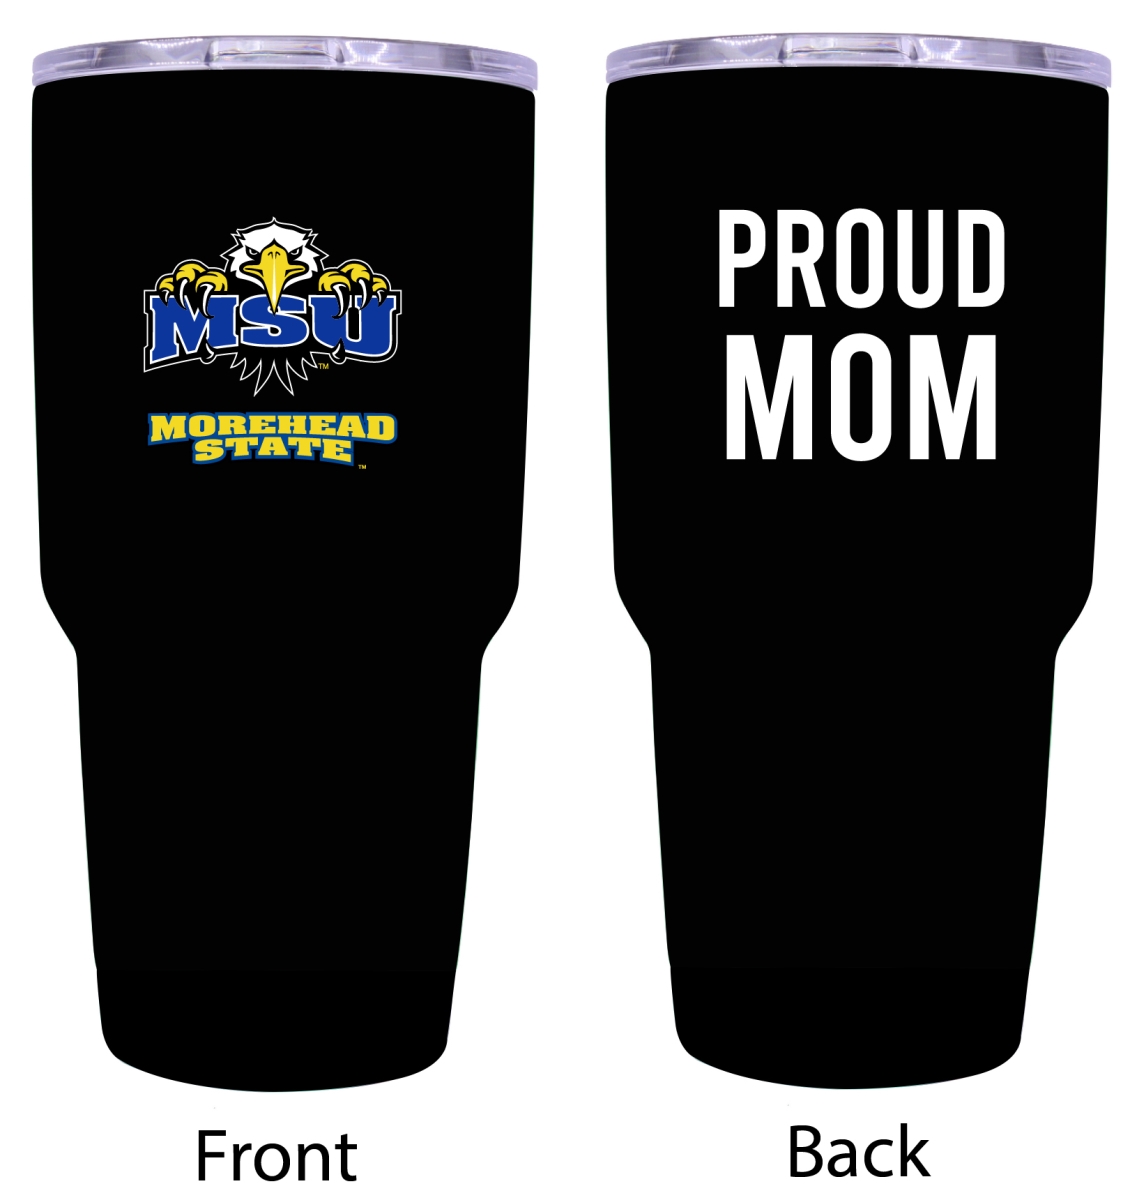 Picture of R & R Imports ITB-C-MORE20 MOM Morehead State University Proud Mom 20 oz Insulated Stainless Steel Tumblers